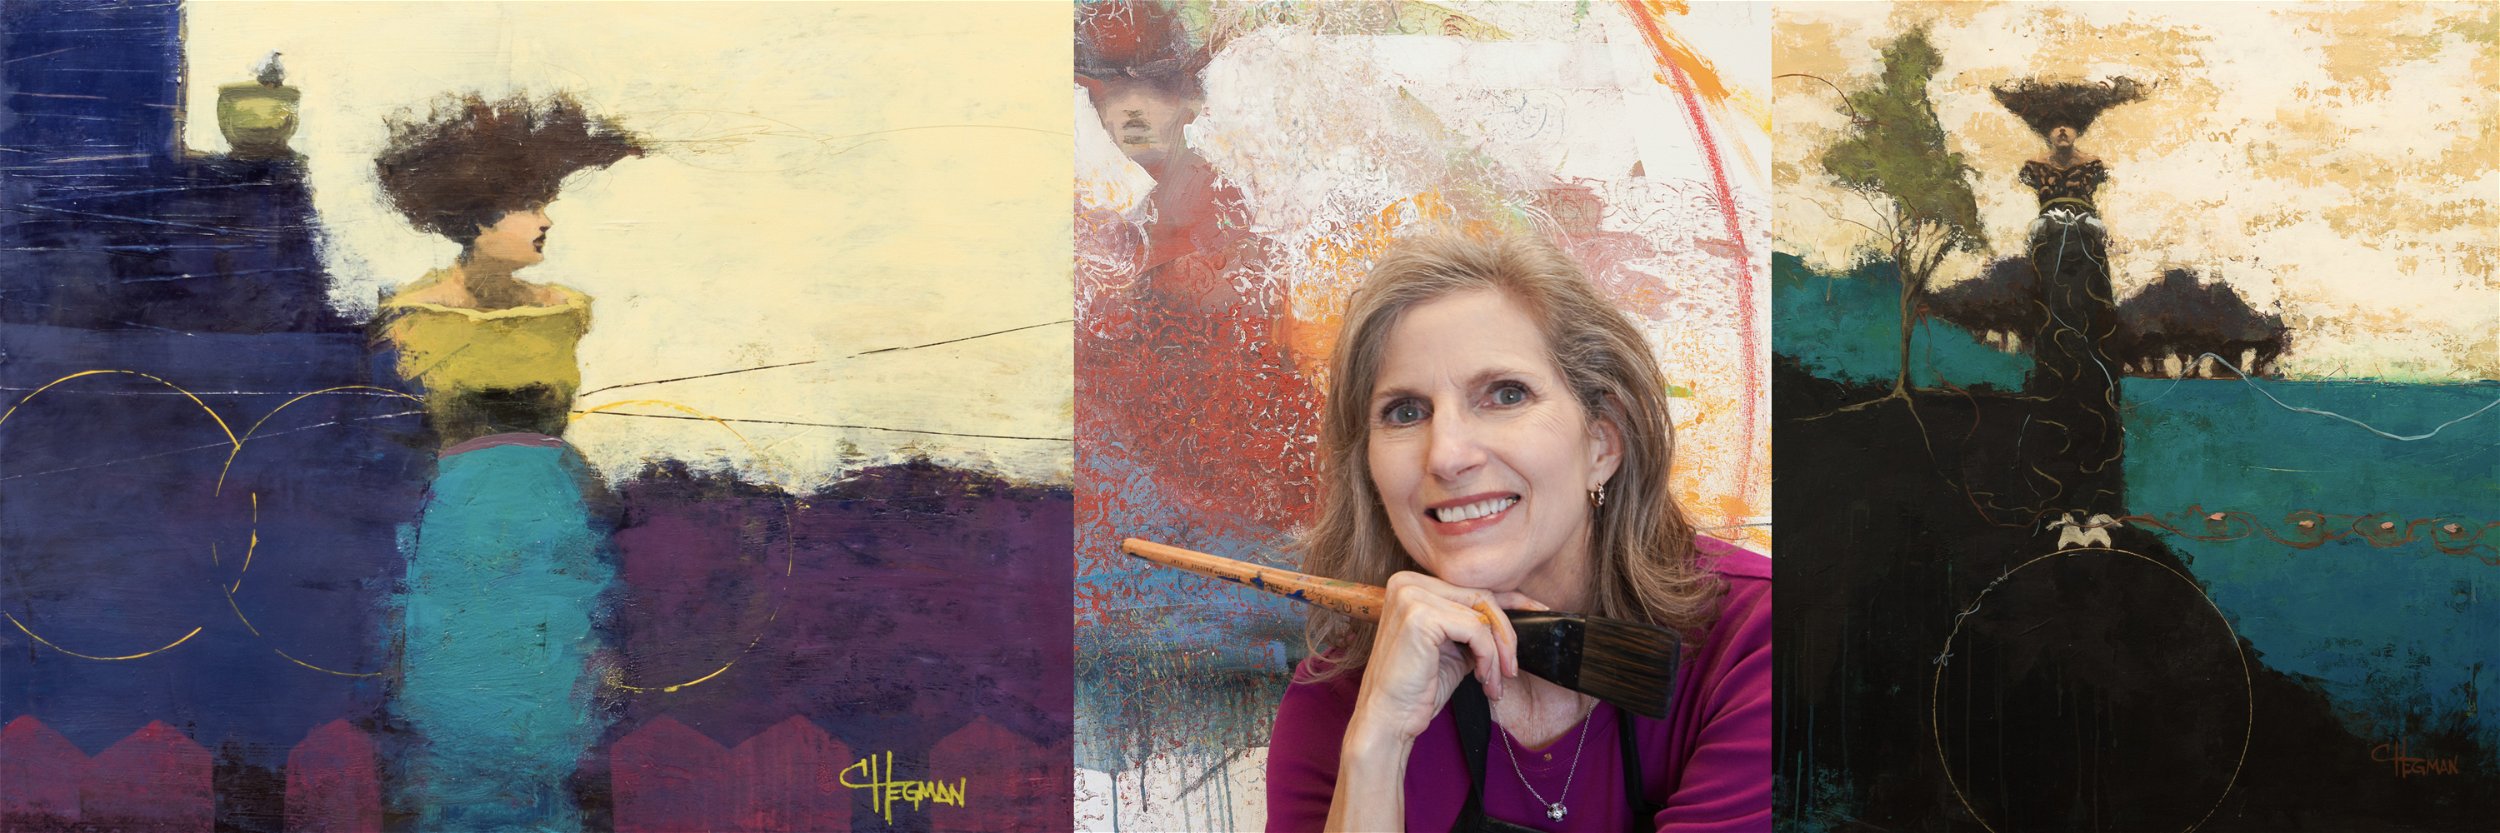 Cathy Hegman’s Mysterious and Romantic Dreams in Paint